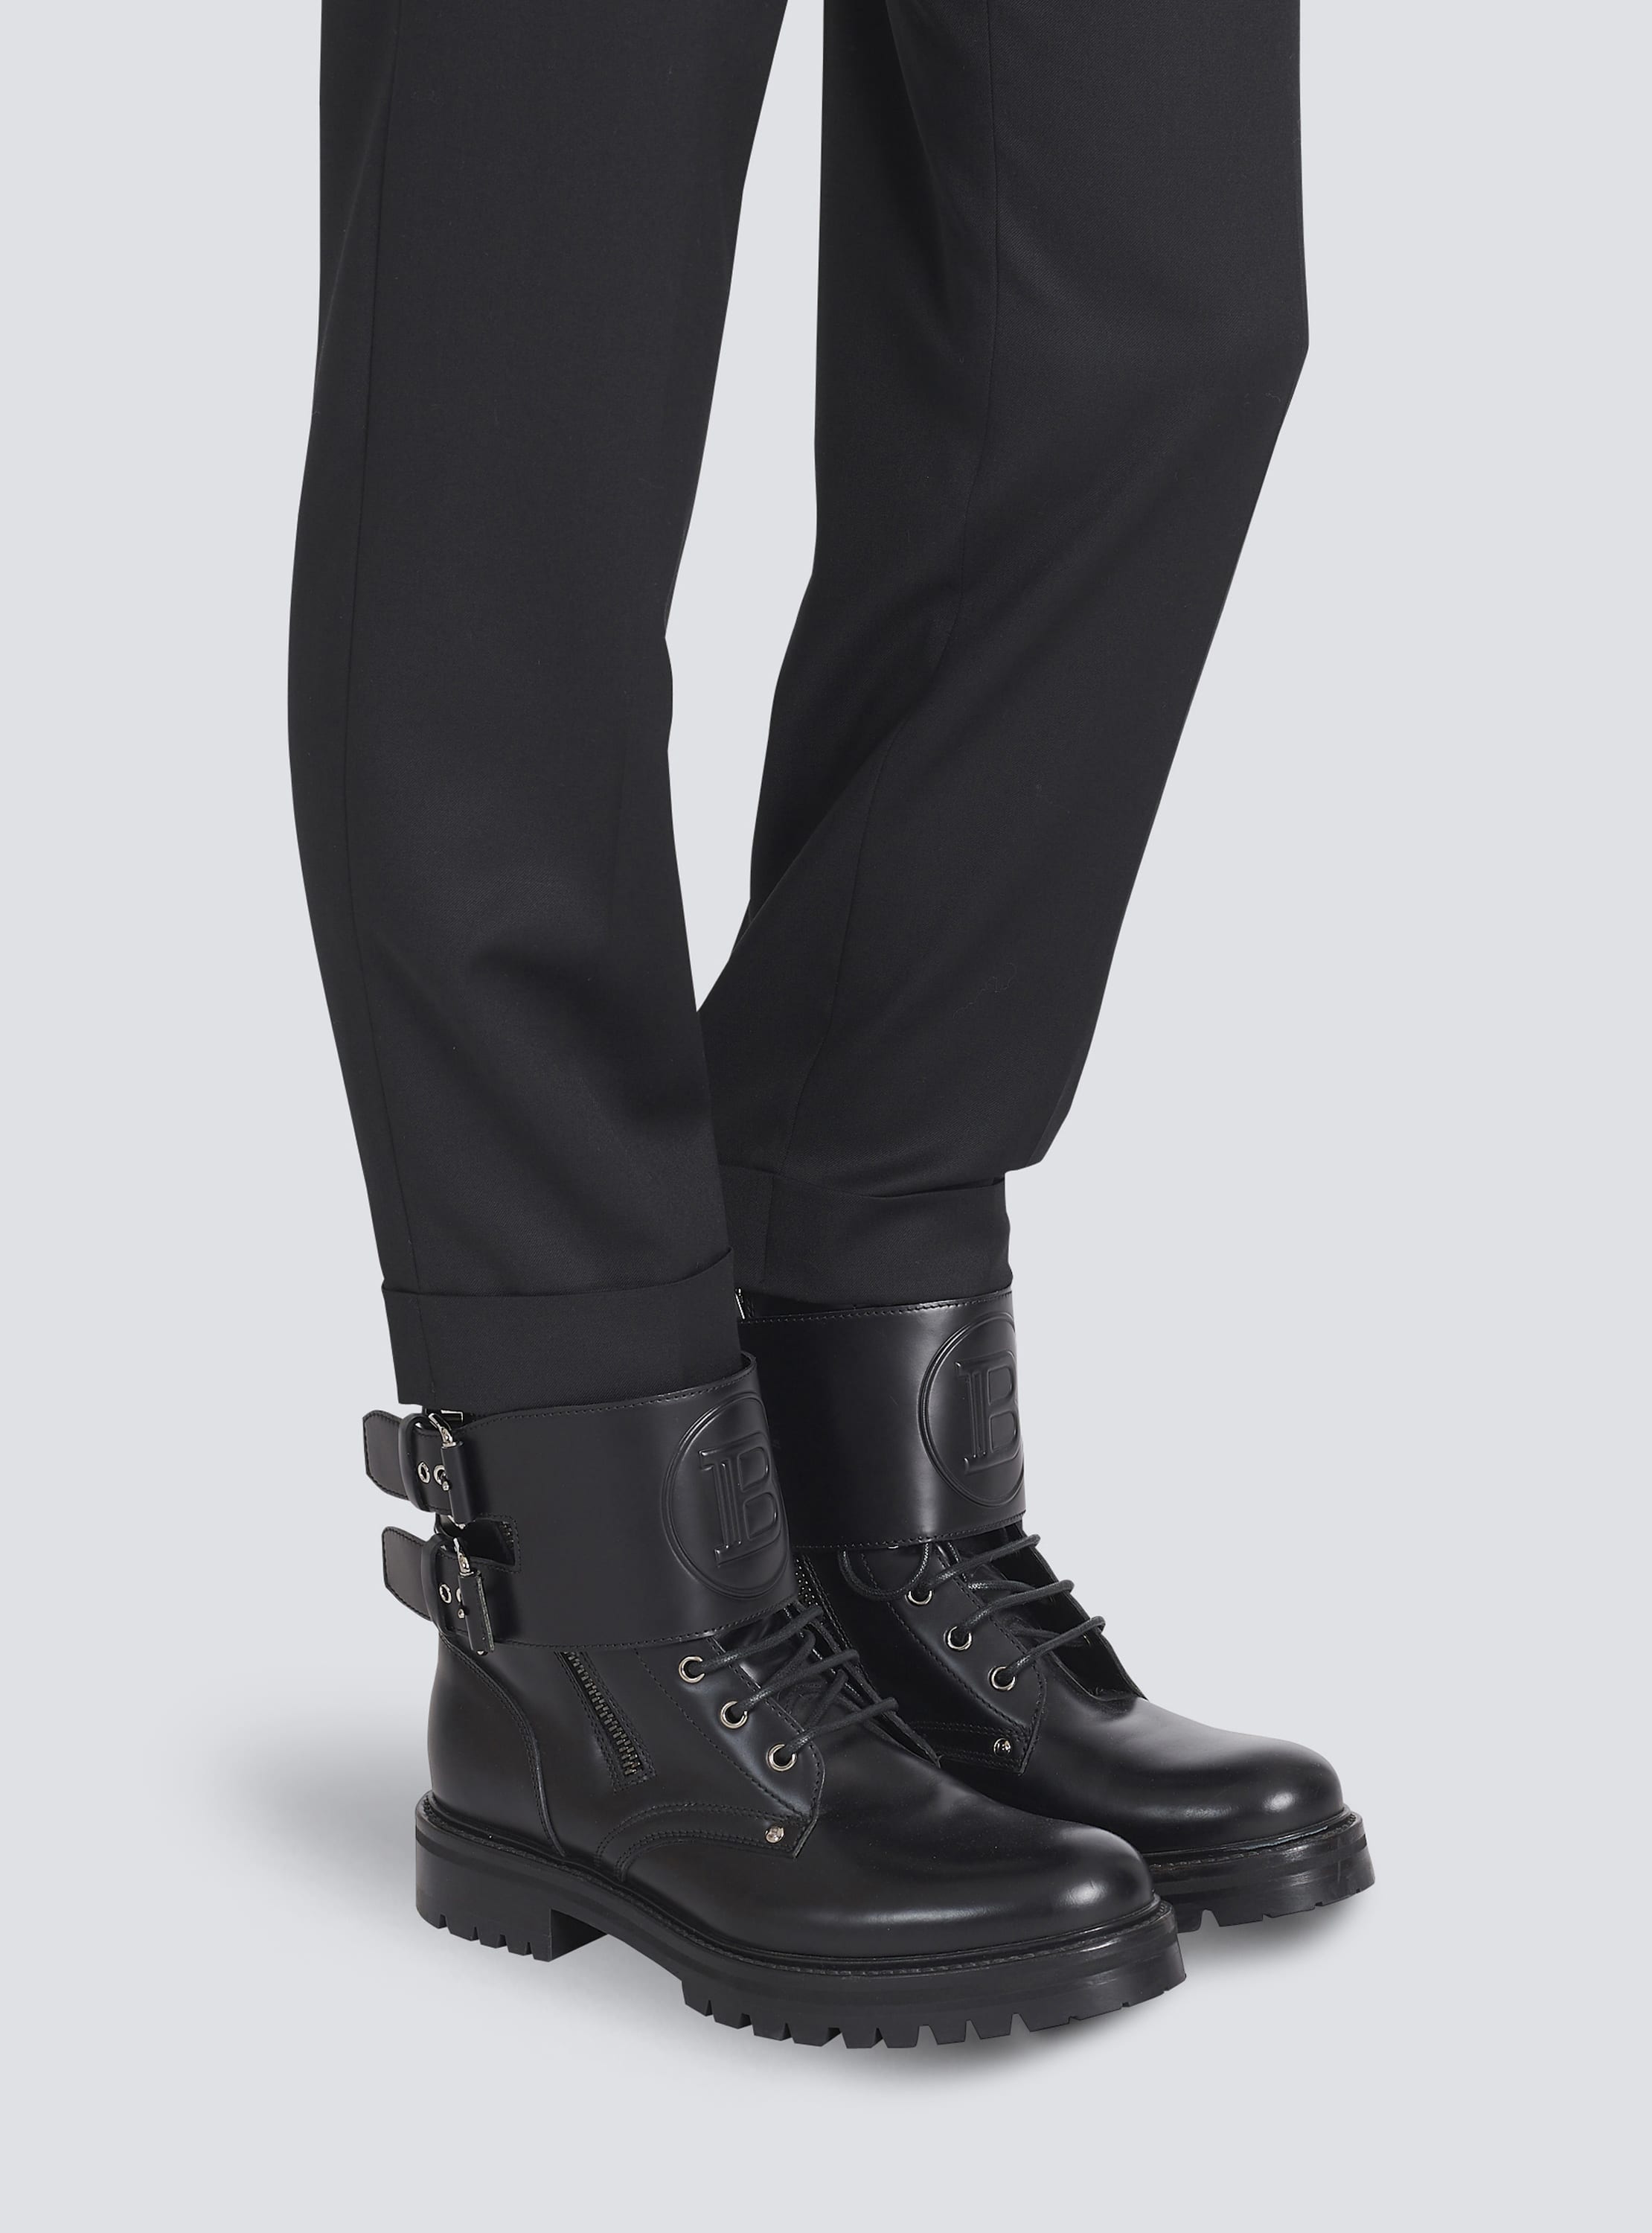 Masculine Allure: The Balmain Ankle Boots Men's Collection